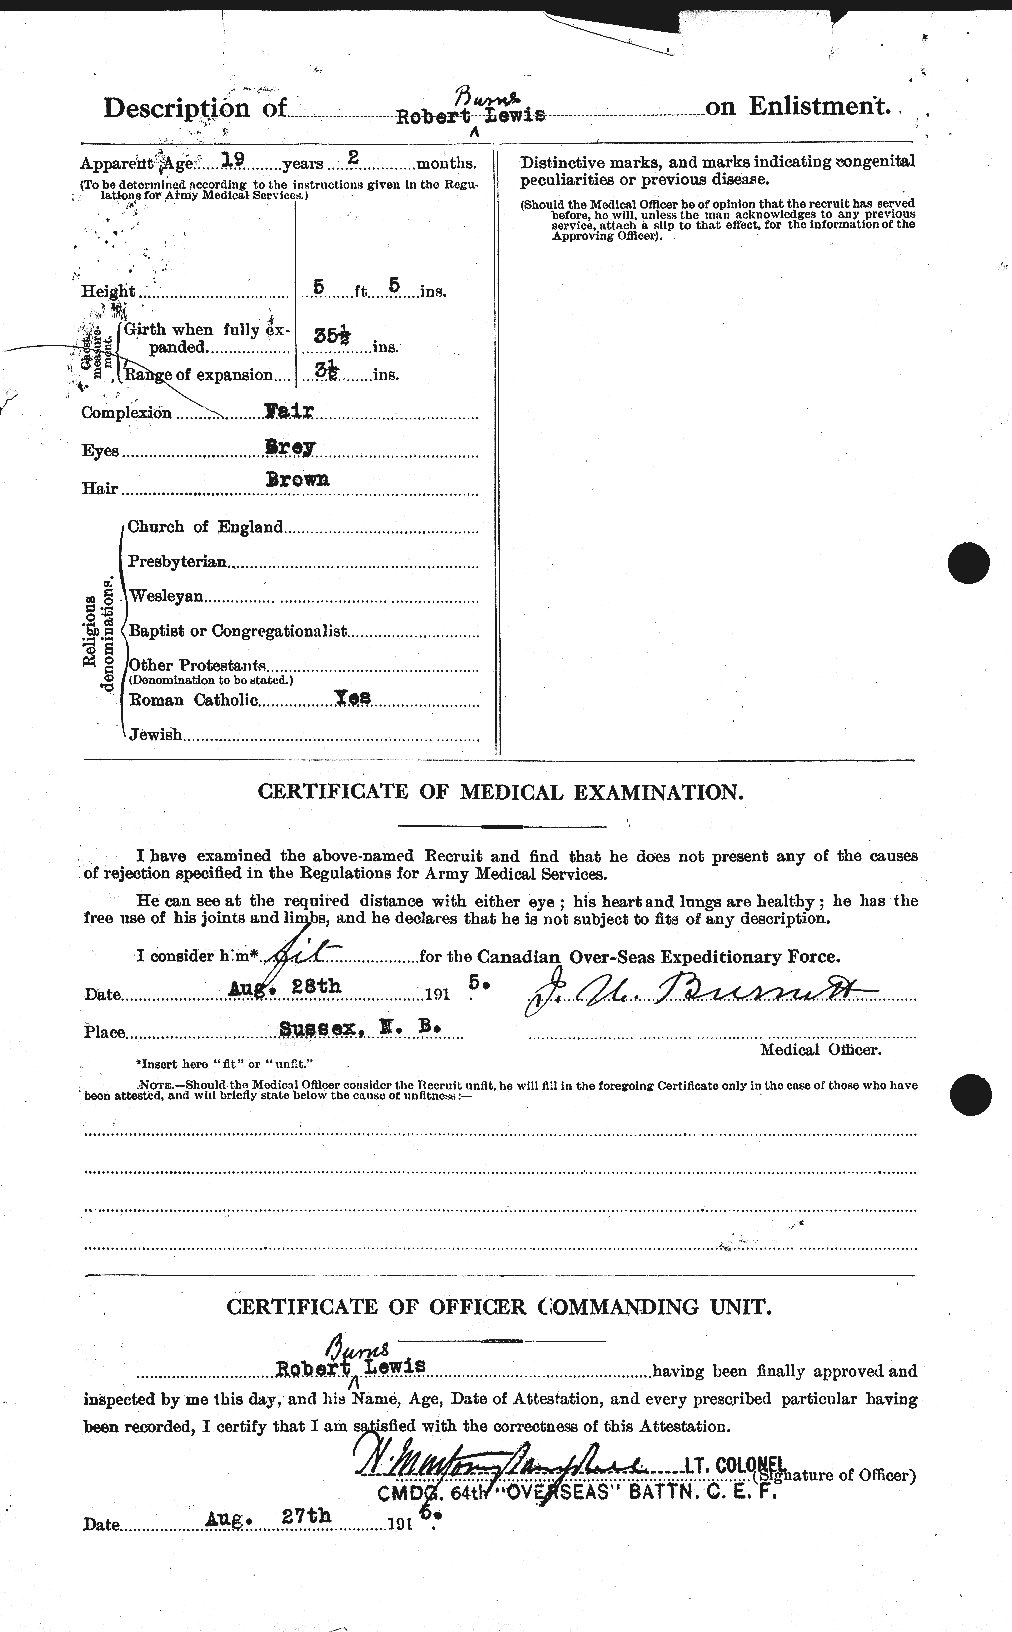 Personnel Records of the First World War - CEF 463900b